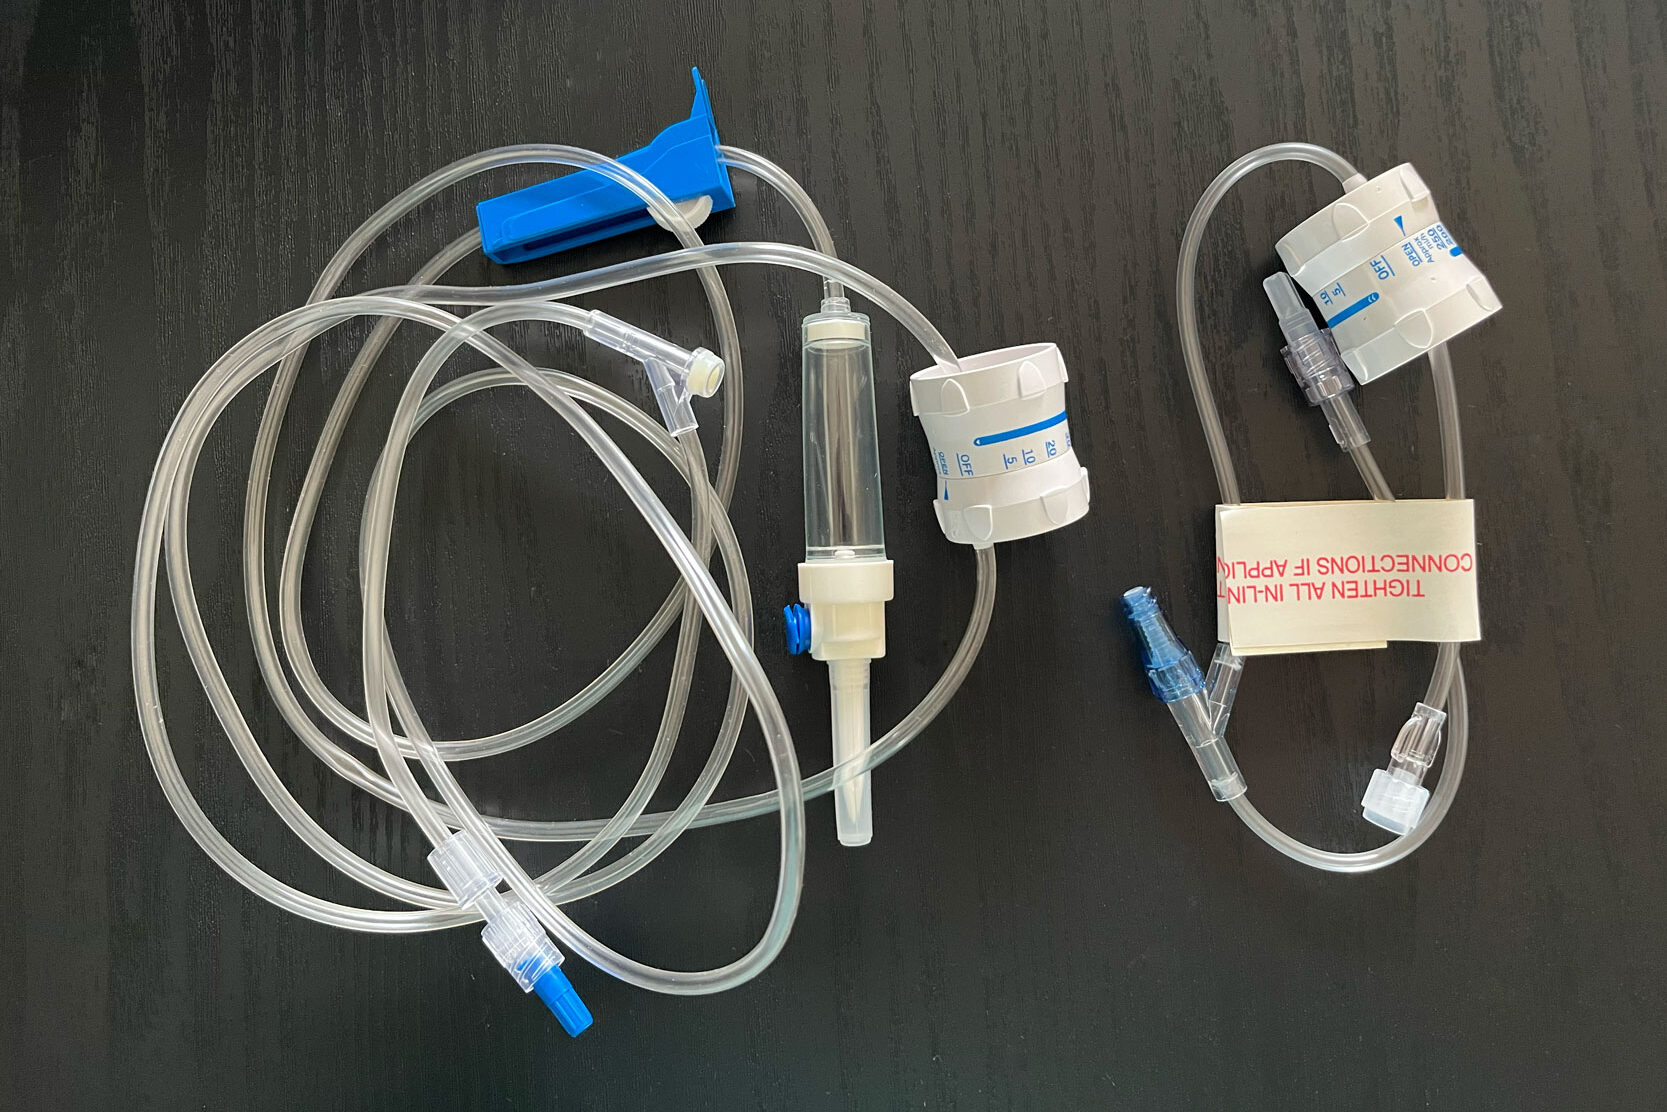 Photo showing Dial-a-Flow hooked up to both extension tubing and to IV tubing kit.